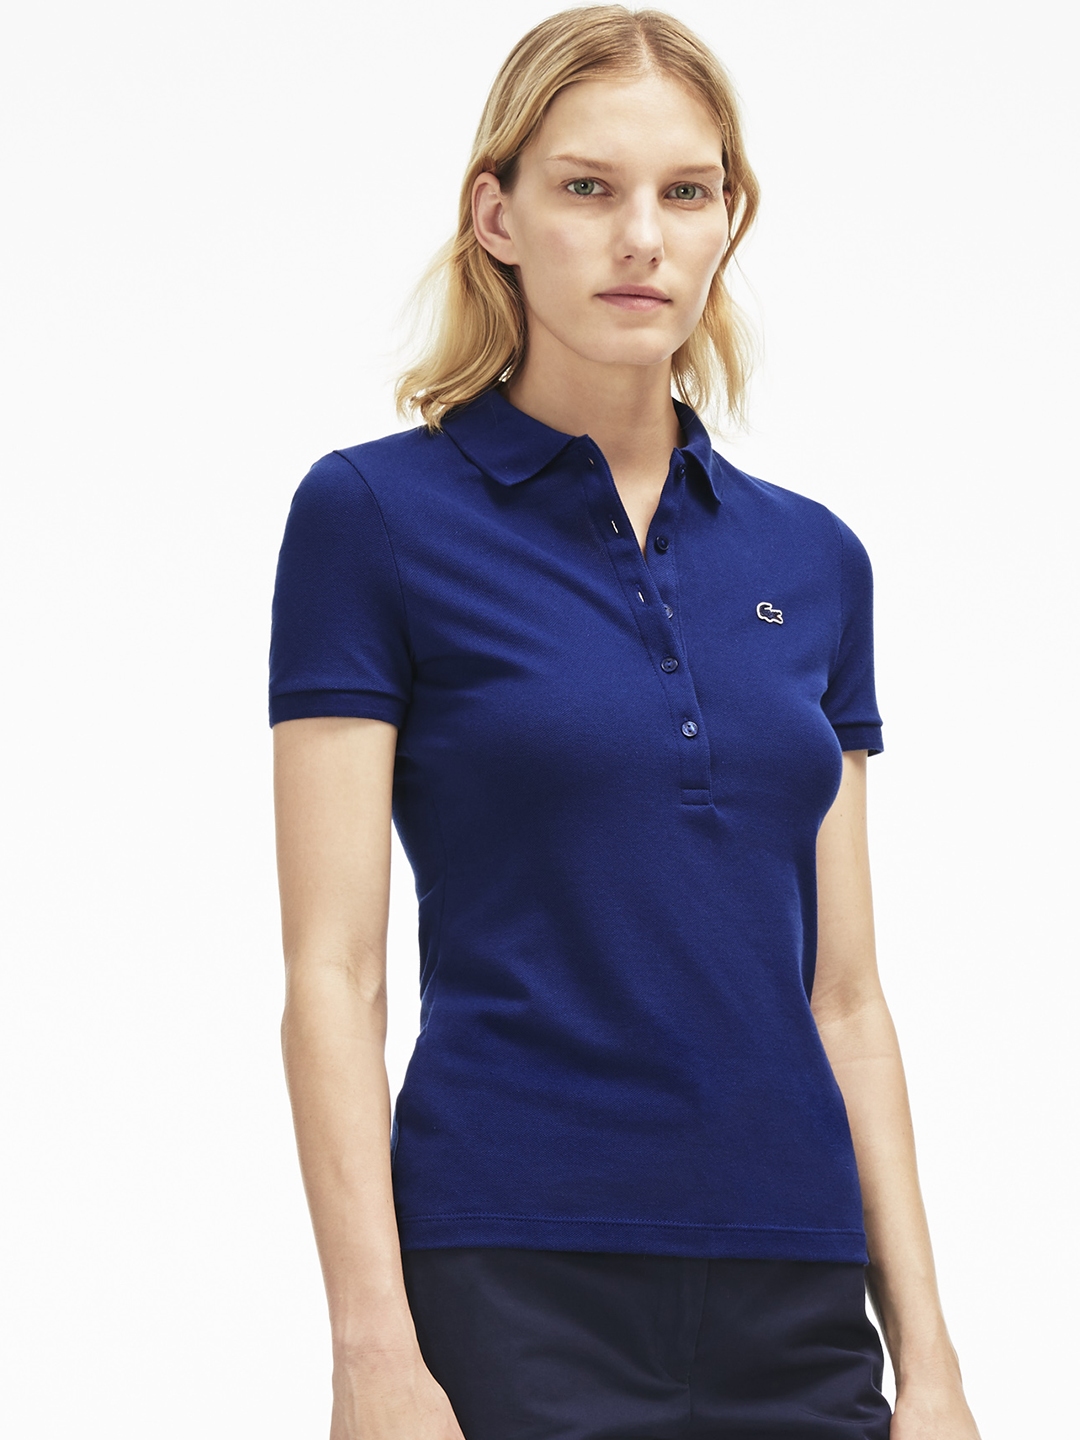 sympati angre bestikke Buy Lacoste Women Blue Solid Polo Collar T Shirt - Tshirts for Women  2263609 | Myntra